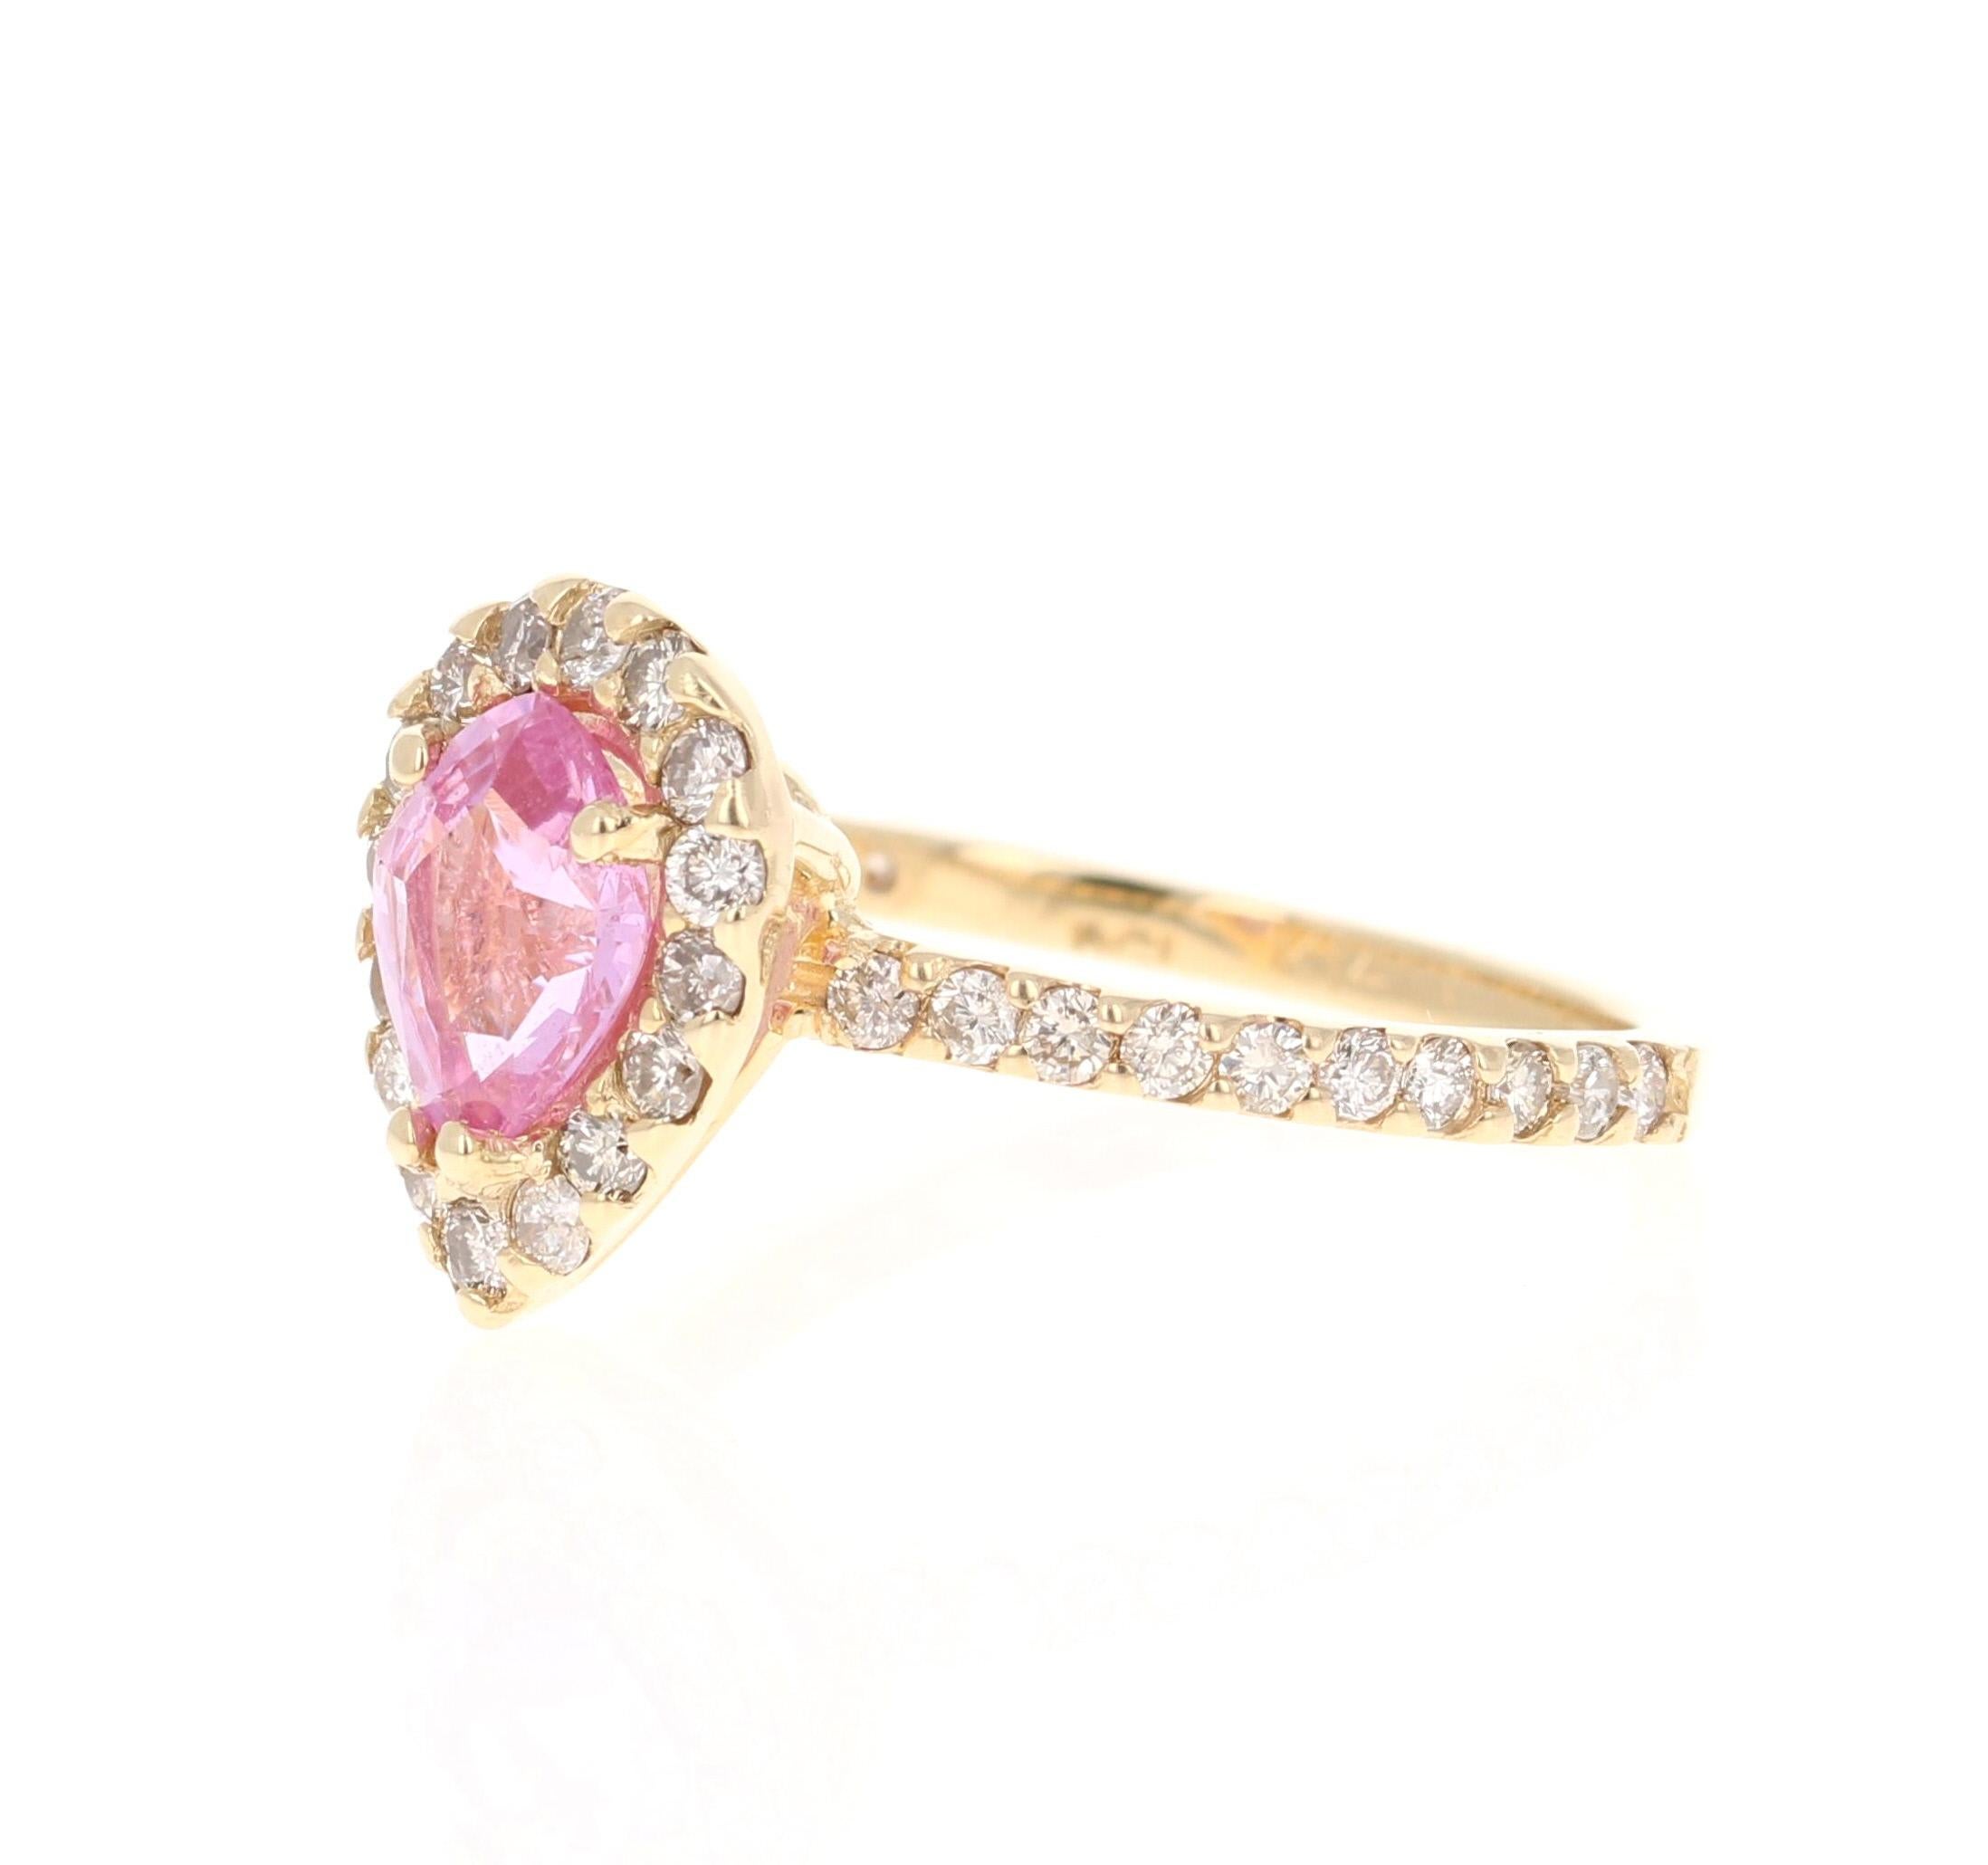 This beautiful ring has a 1.24 Carat Pear Cut Pink Sapphire and is surrounded by 36 Round Cut Diamonds that weigh 0.66 Carats. The total carat weight of the ring is 1.90 Carats. 

The ring is beautifully set in 14K Rose Gold with an approximate